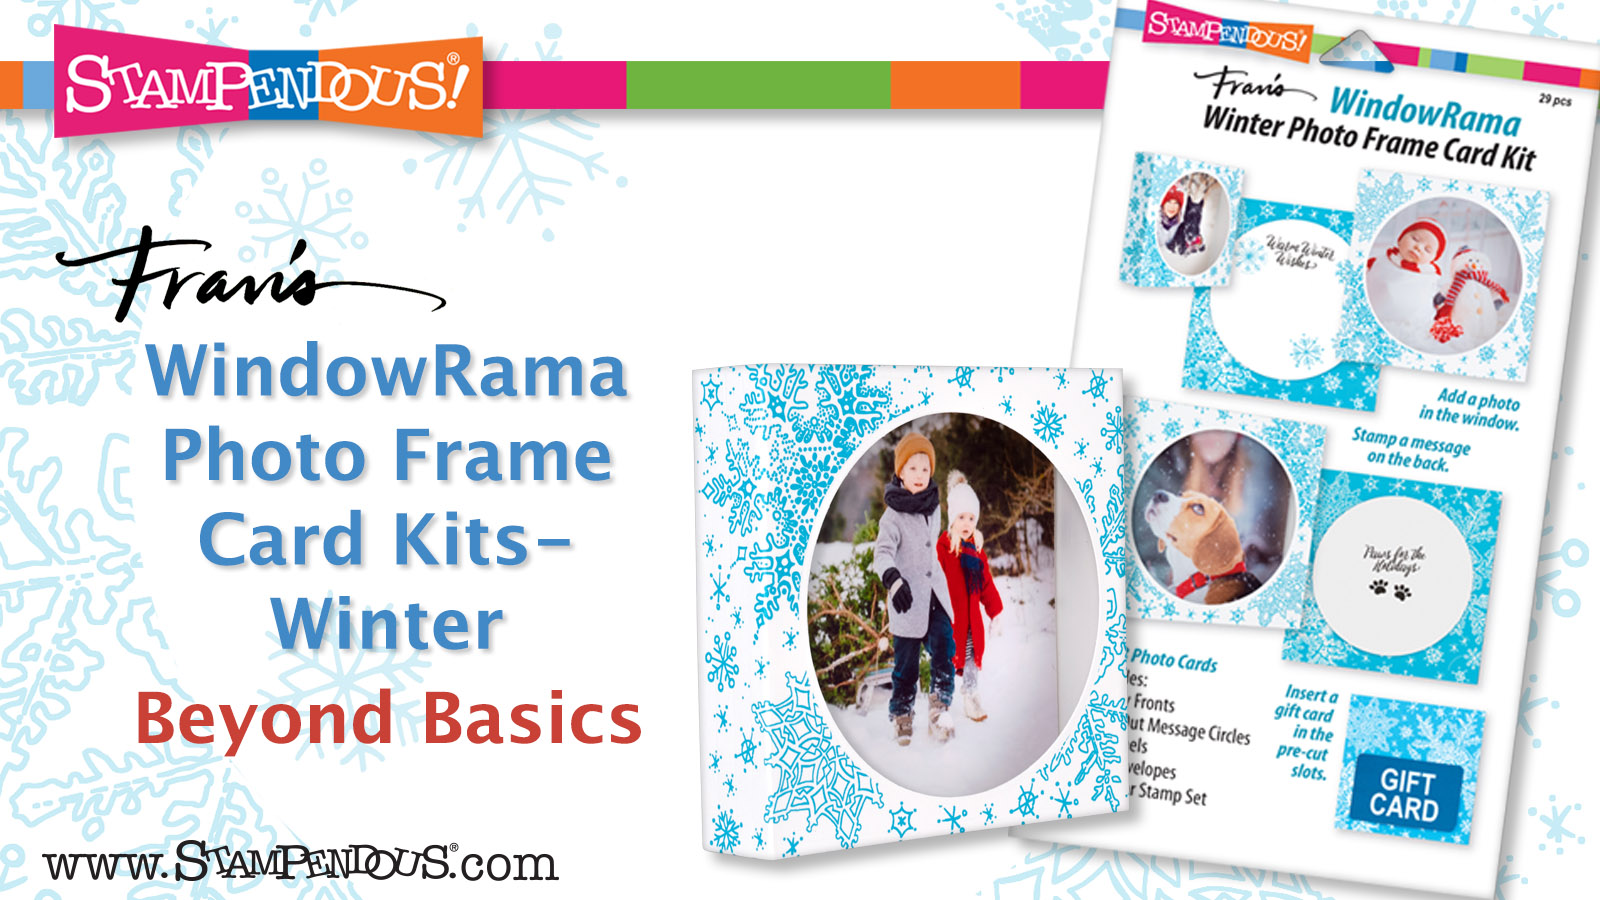 WindowRama Photo Frame Cards Kits advertisement by Stampendous for card making and scrapbooking